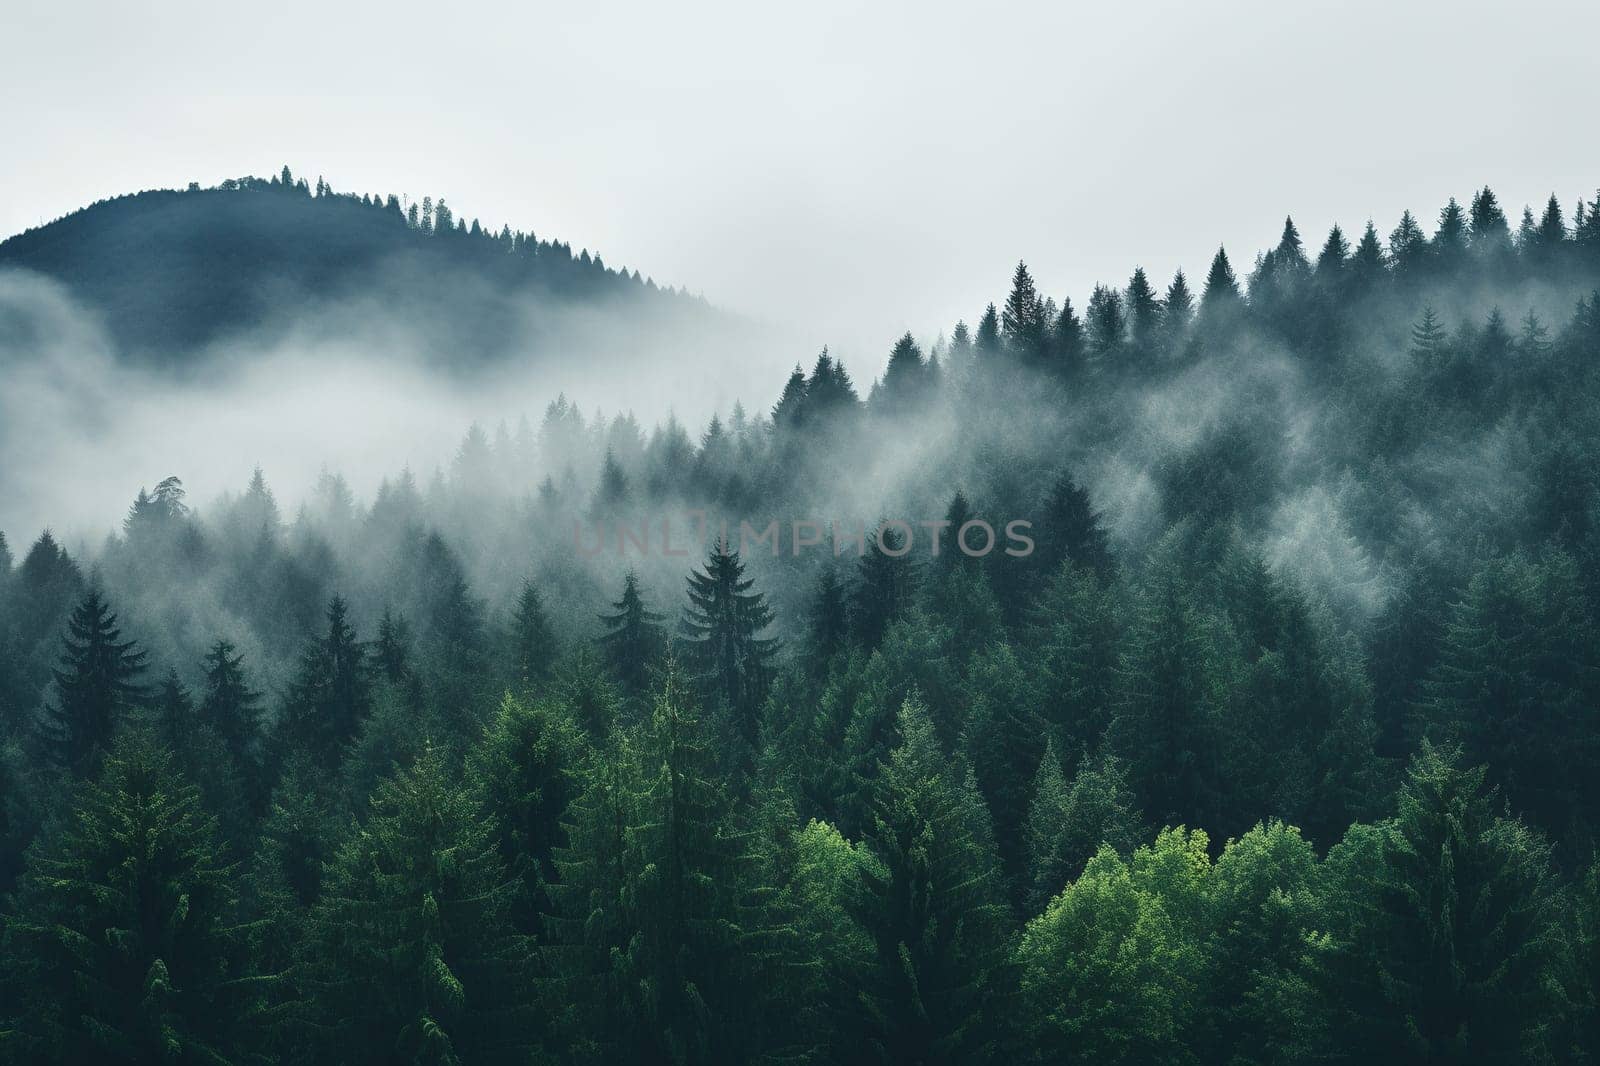 Top view of a misty coniferous forest.